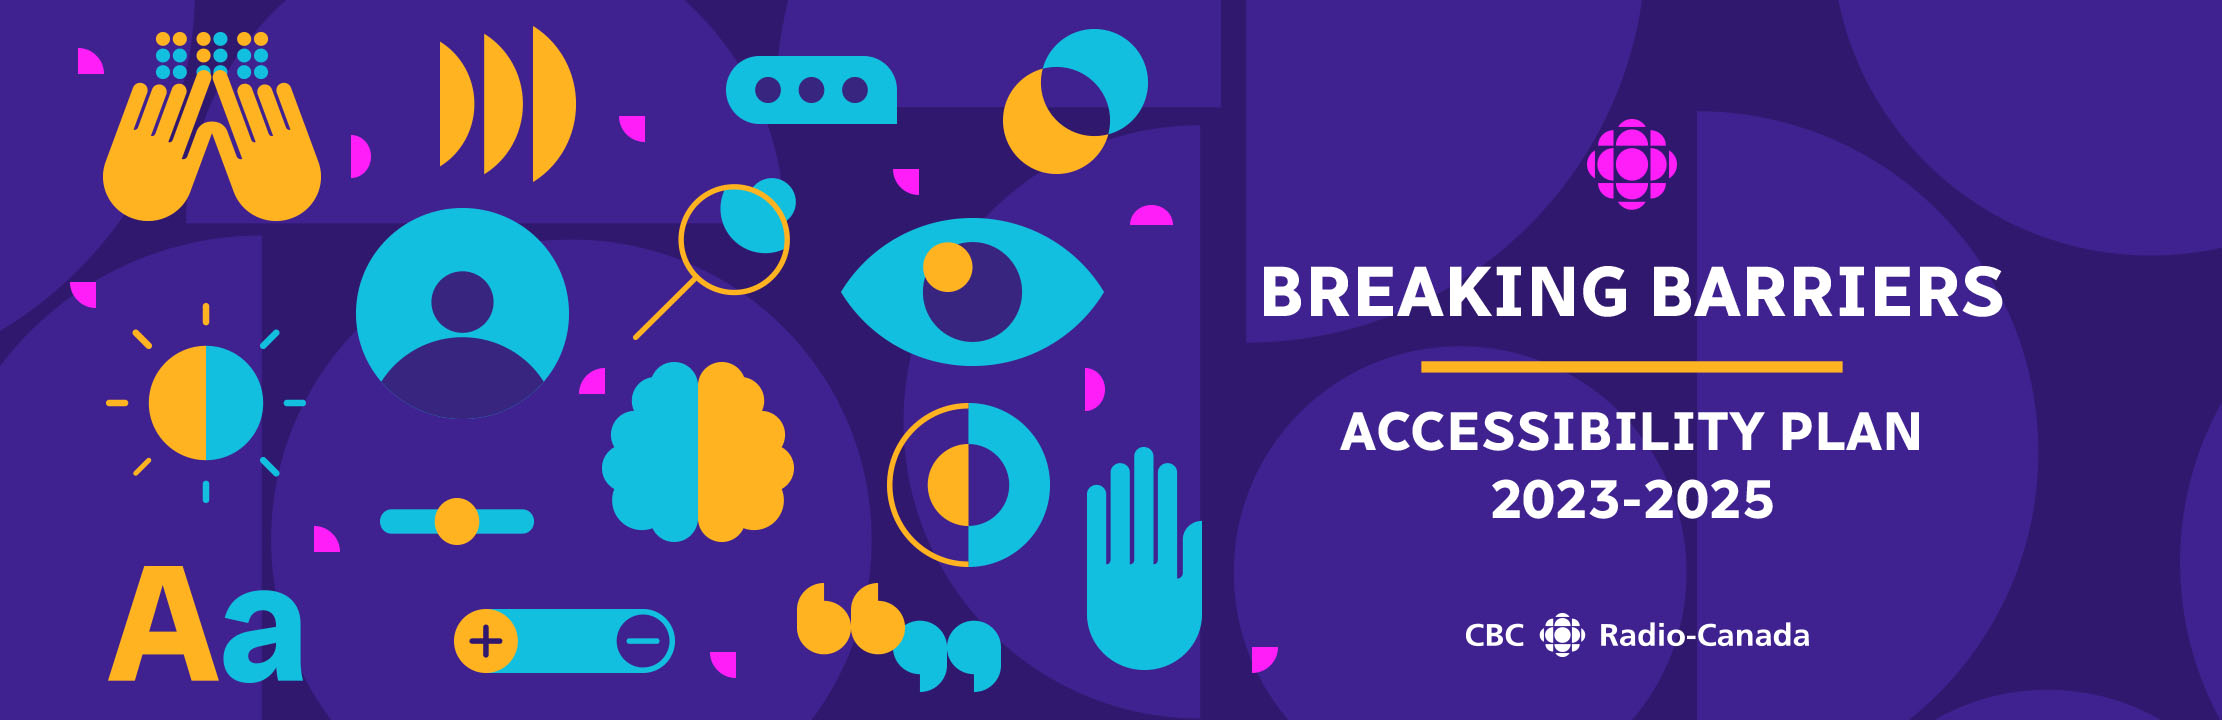 CBC's Breaking Barriers Accessibility Plan